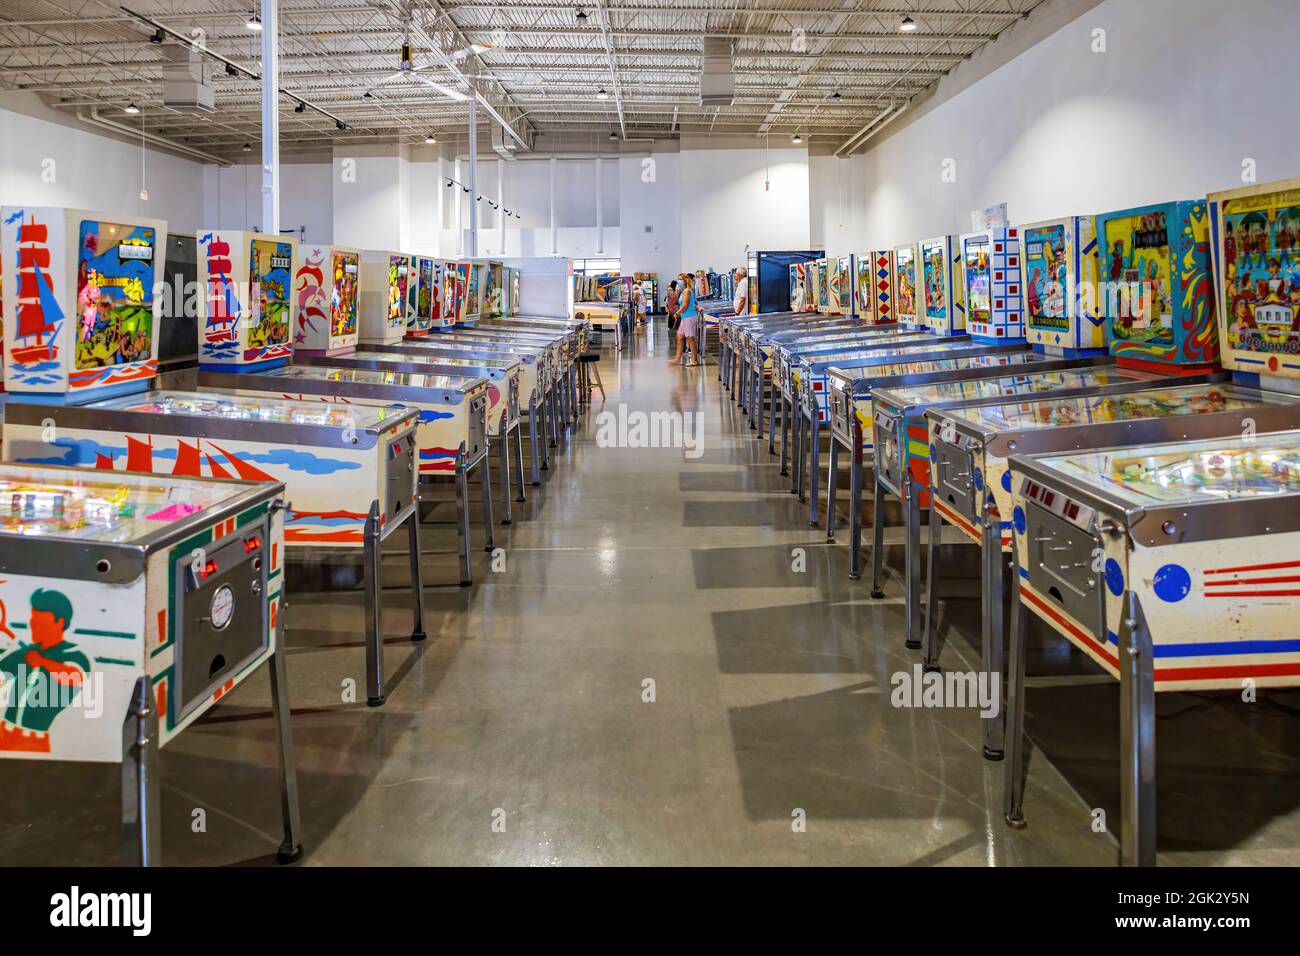 Inside the new Pinball Hall of Fame location on the Las Vegas